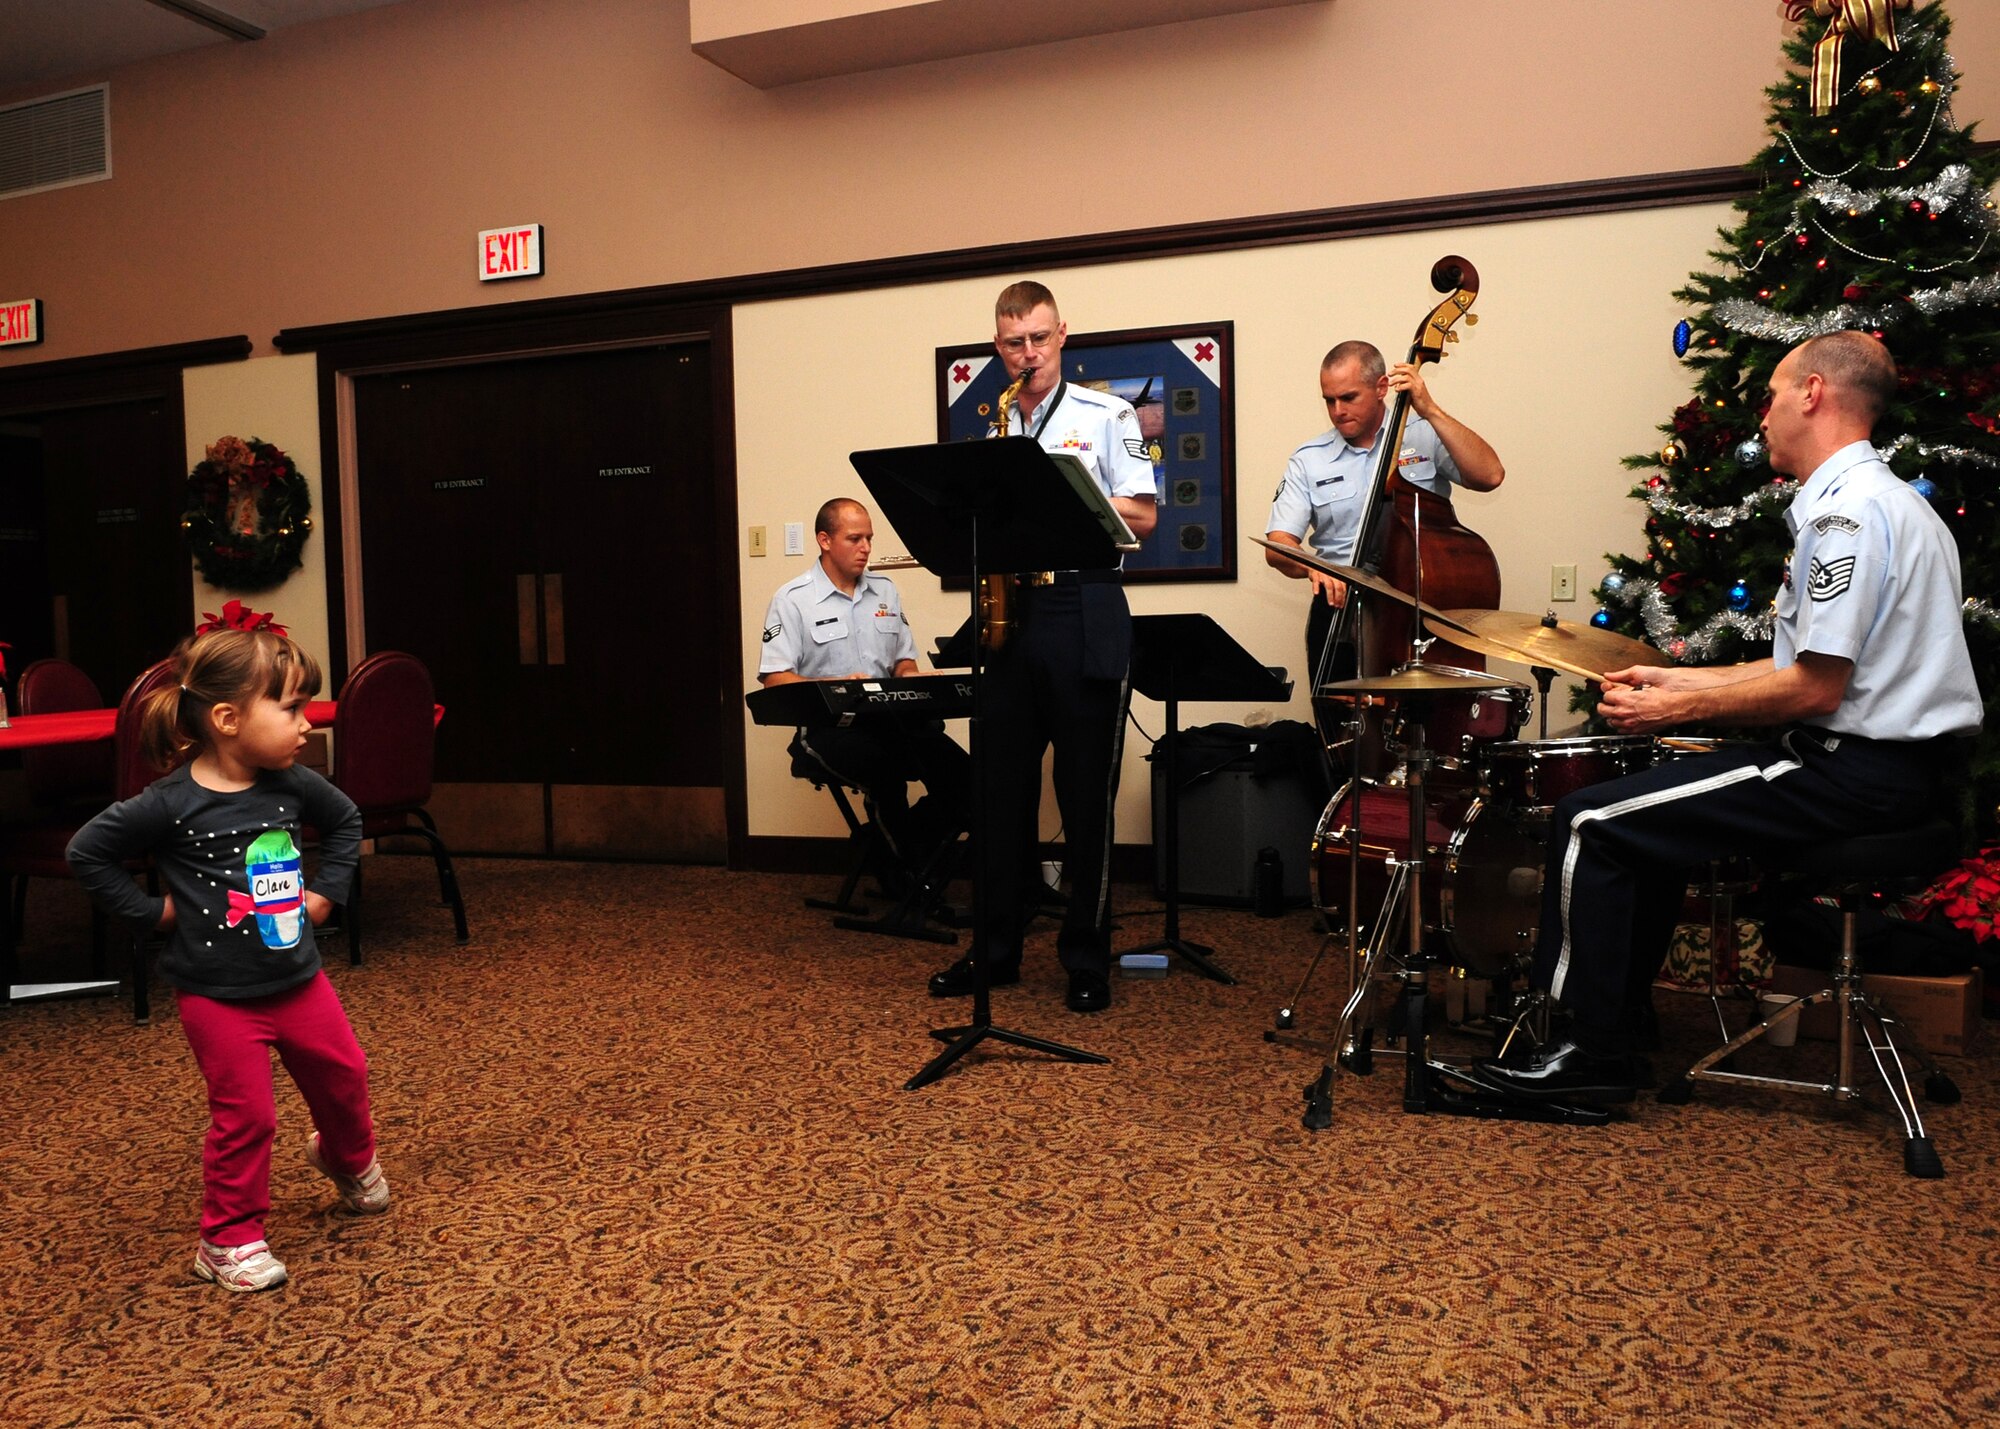 A child, whose father is deployed from Beale Air Force Base, Calif., dances to the music from the Band of the Golden West at the Holiday Hearts Apart Dinner and tree lighting Dec. 7, 2012. The Air Force Band of the Golden West played indoors for the Hearts Apart event while the volunteer band Dingus Moxie and the Flakes played near the base Christmas tree outdoors. (U.S. Air Force photo by Senior Airman Shawn Nickel/Released)